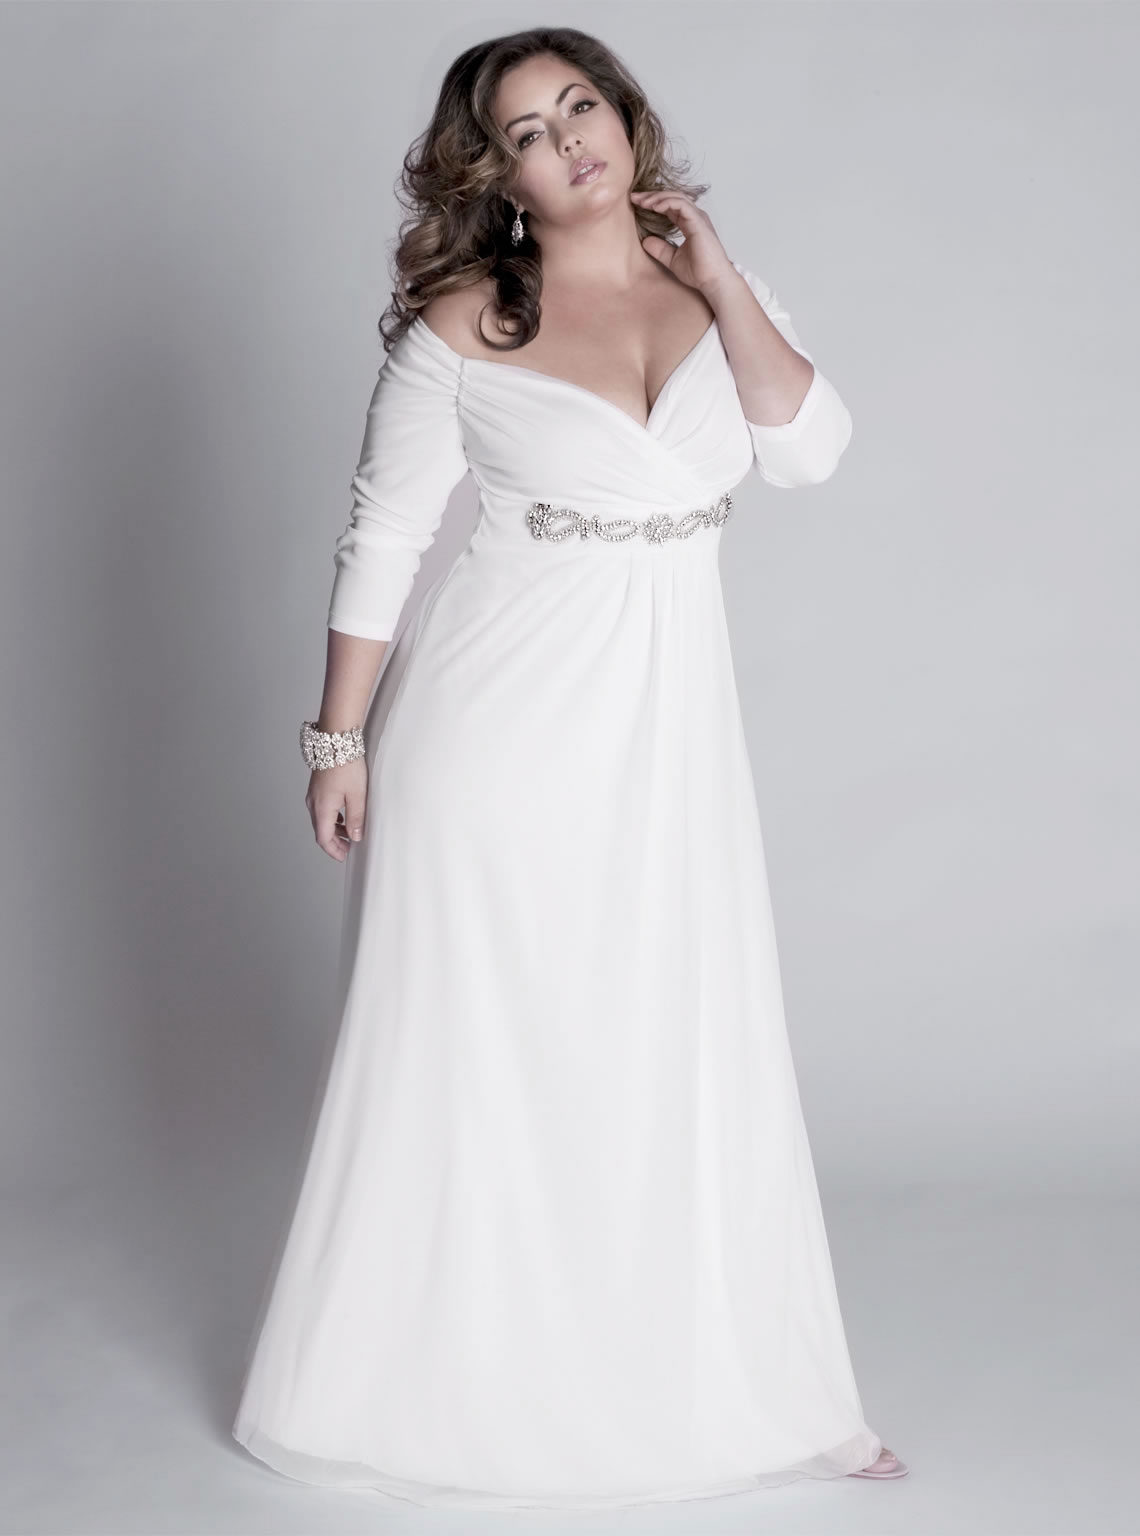 Graduation Dresses Plus Size White And Review Clothing Brand